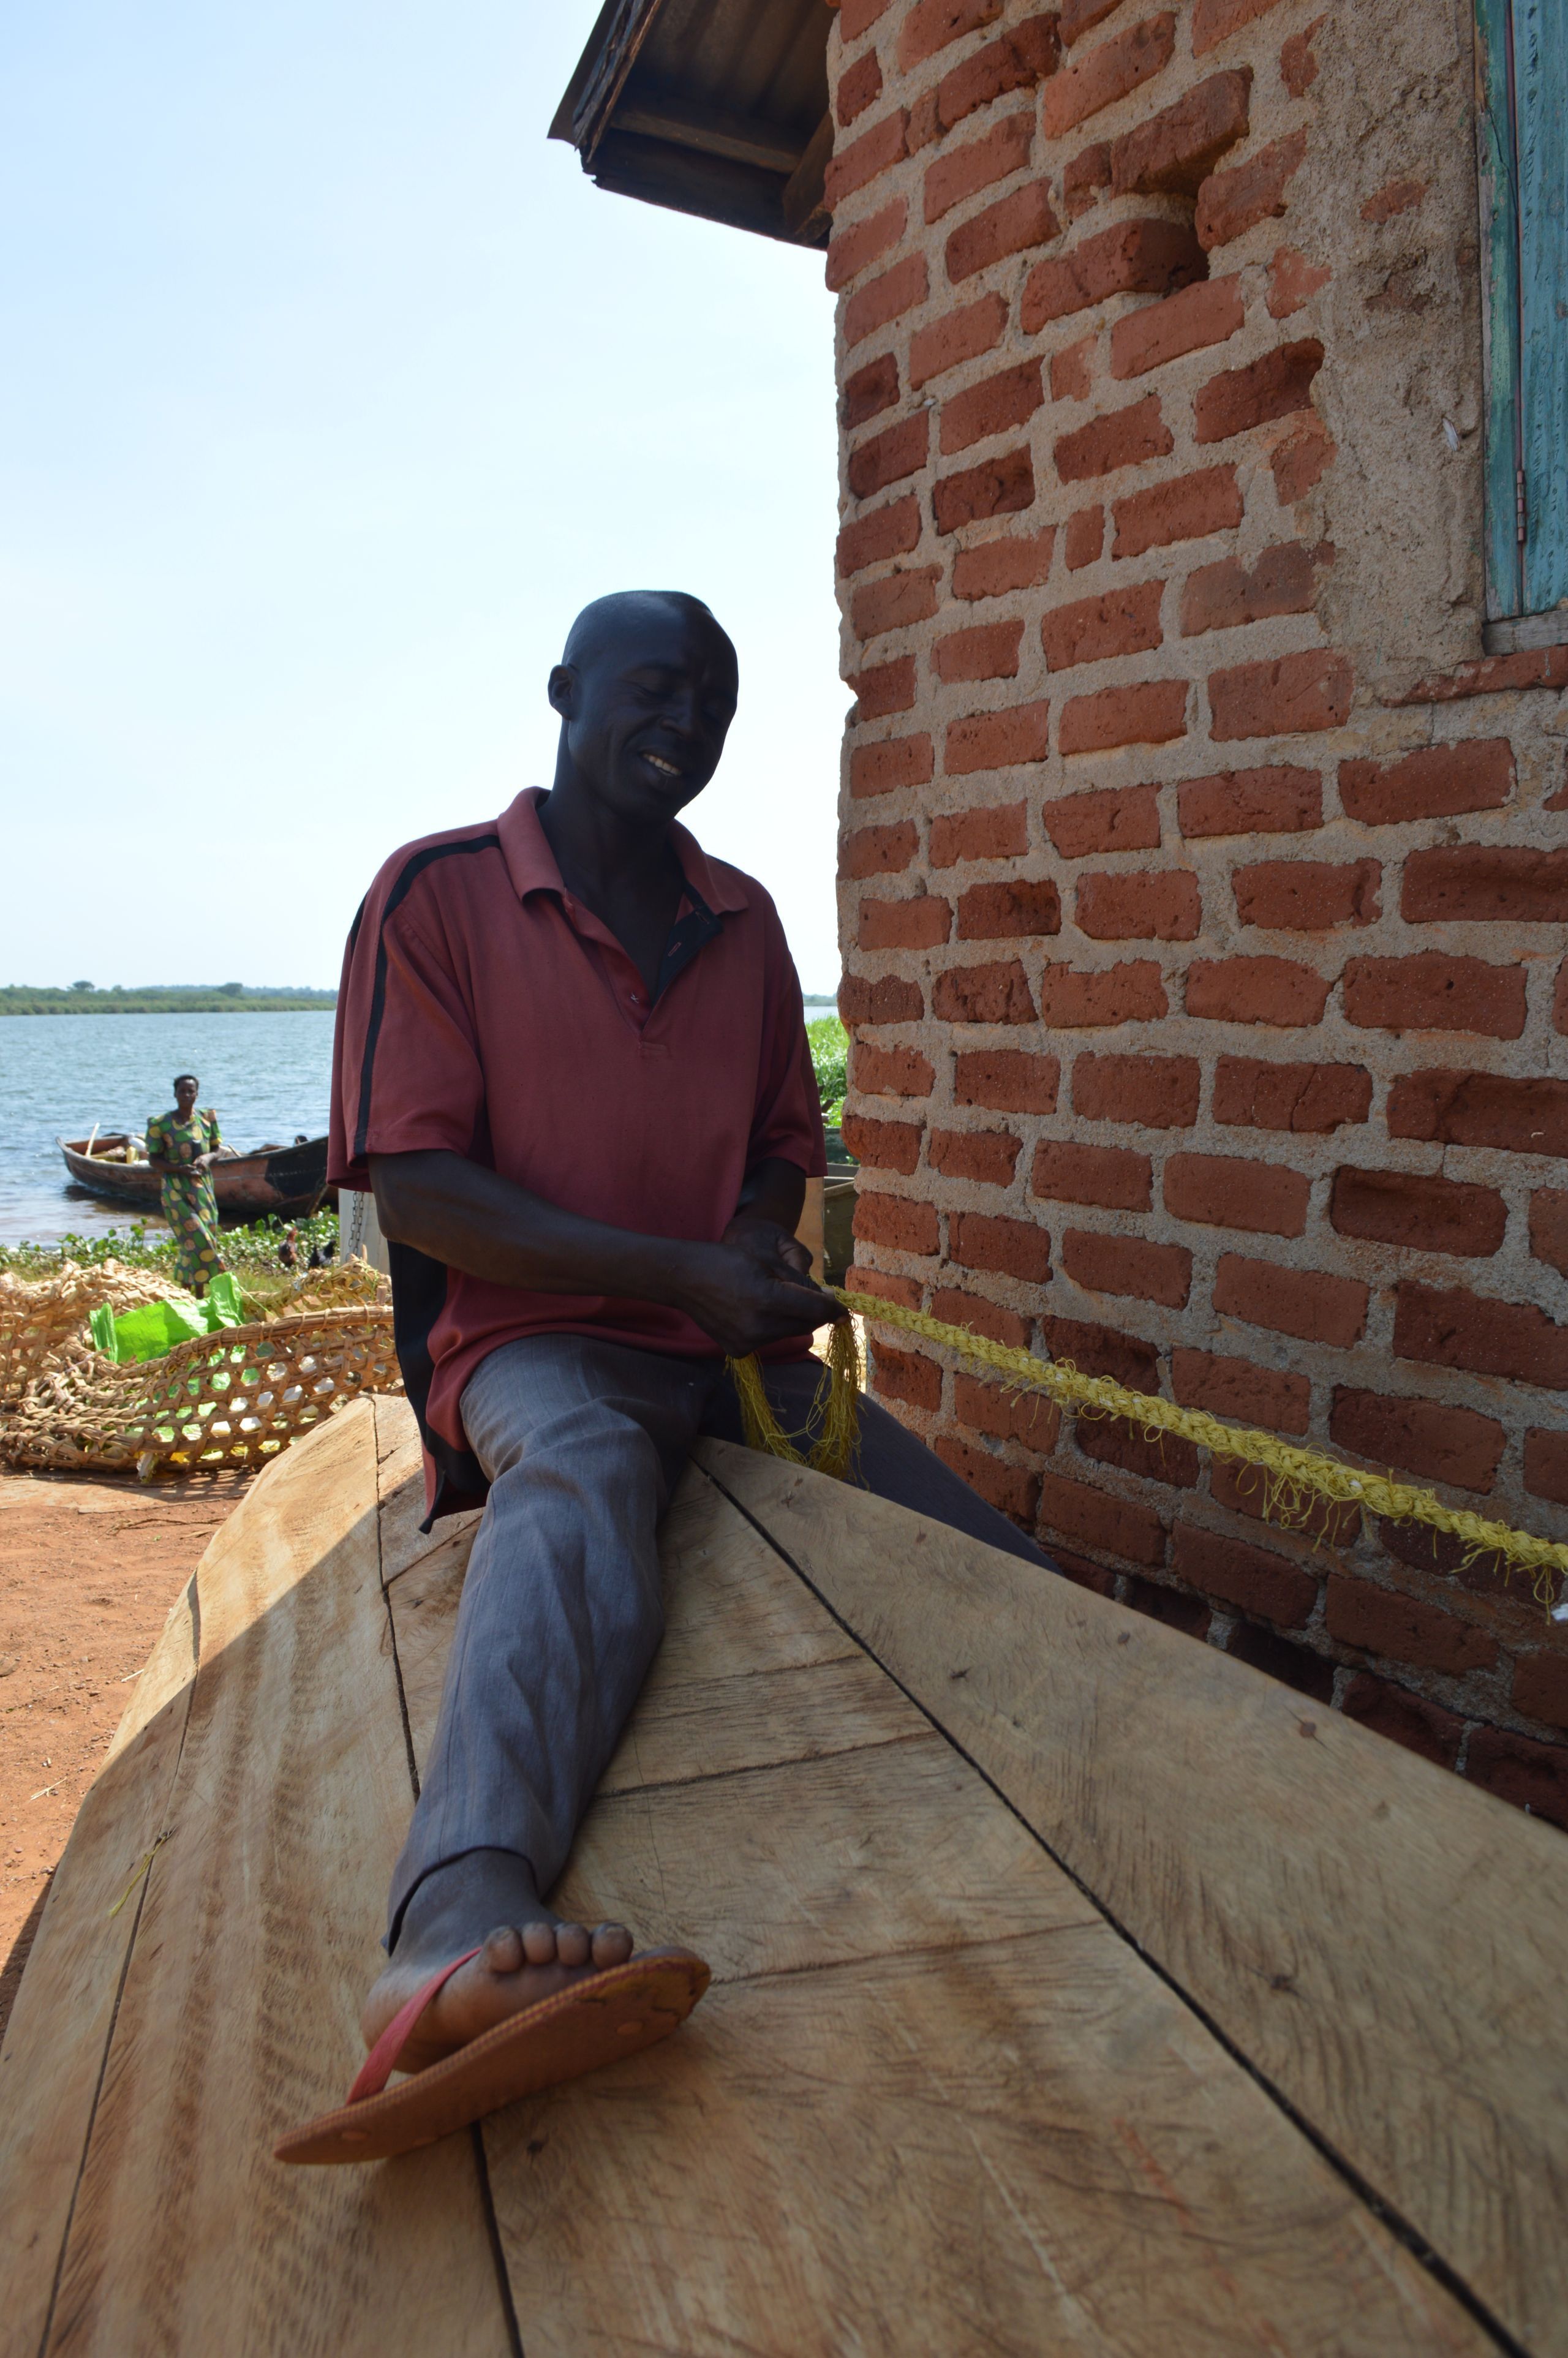 A fisherman working in Walumbe village. When the demarcation of the buffer zone is complete, many Walumbe residents may be made to leave the area, according to NEMA. Image by Annika McGinnis. Uganda, 2019.